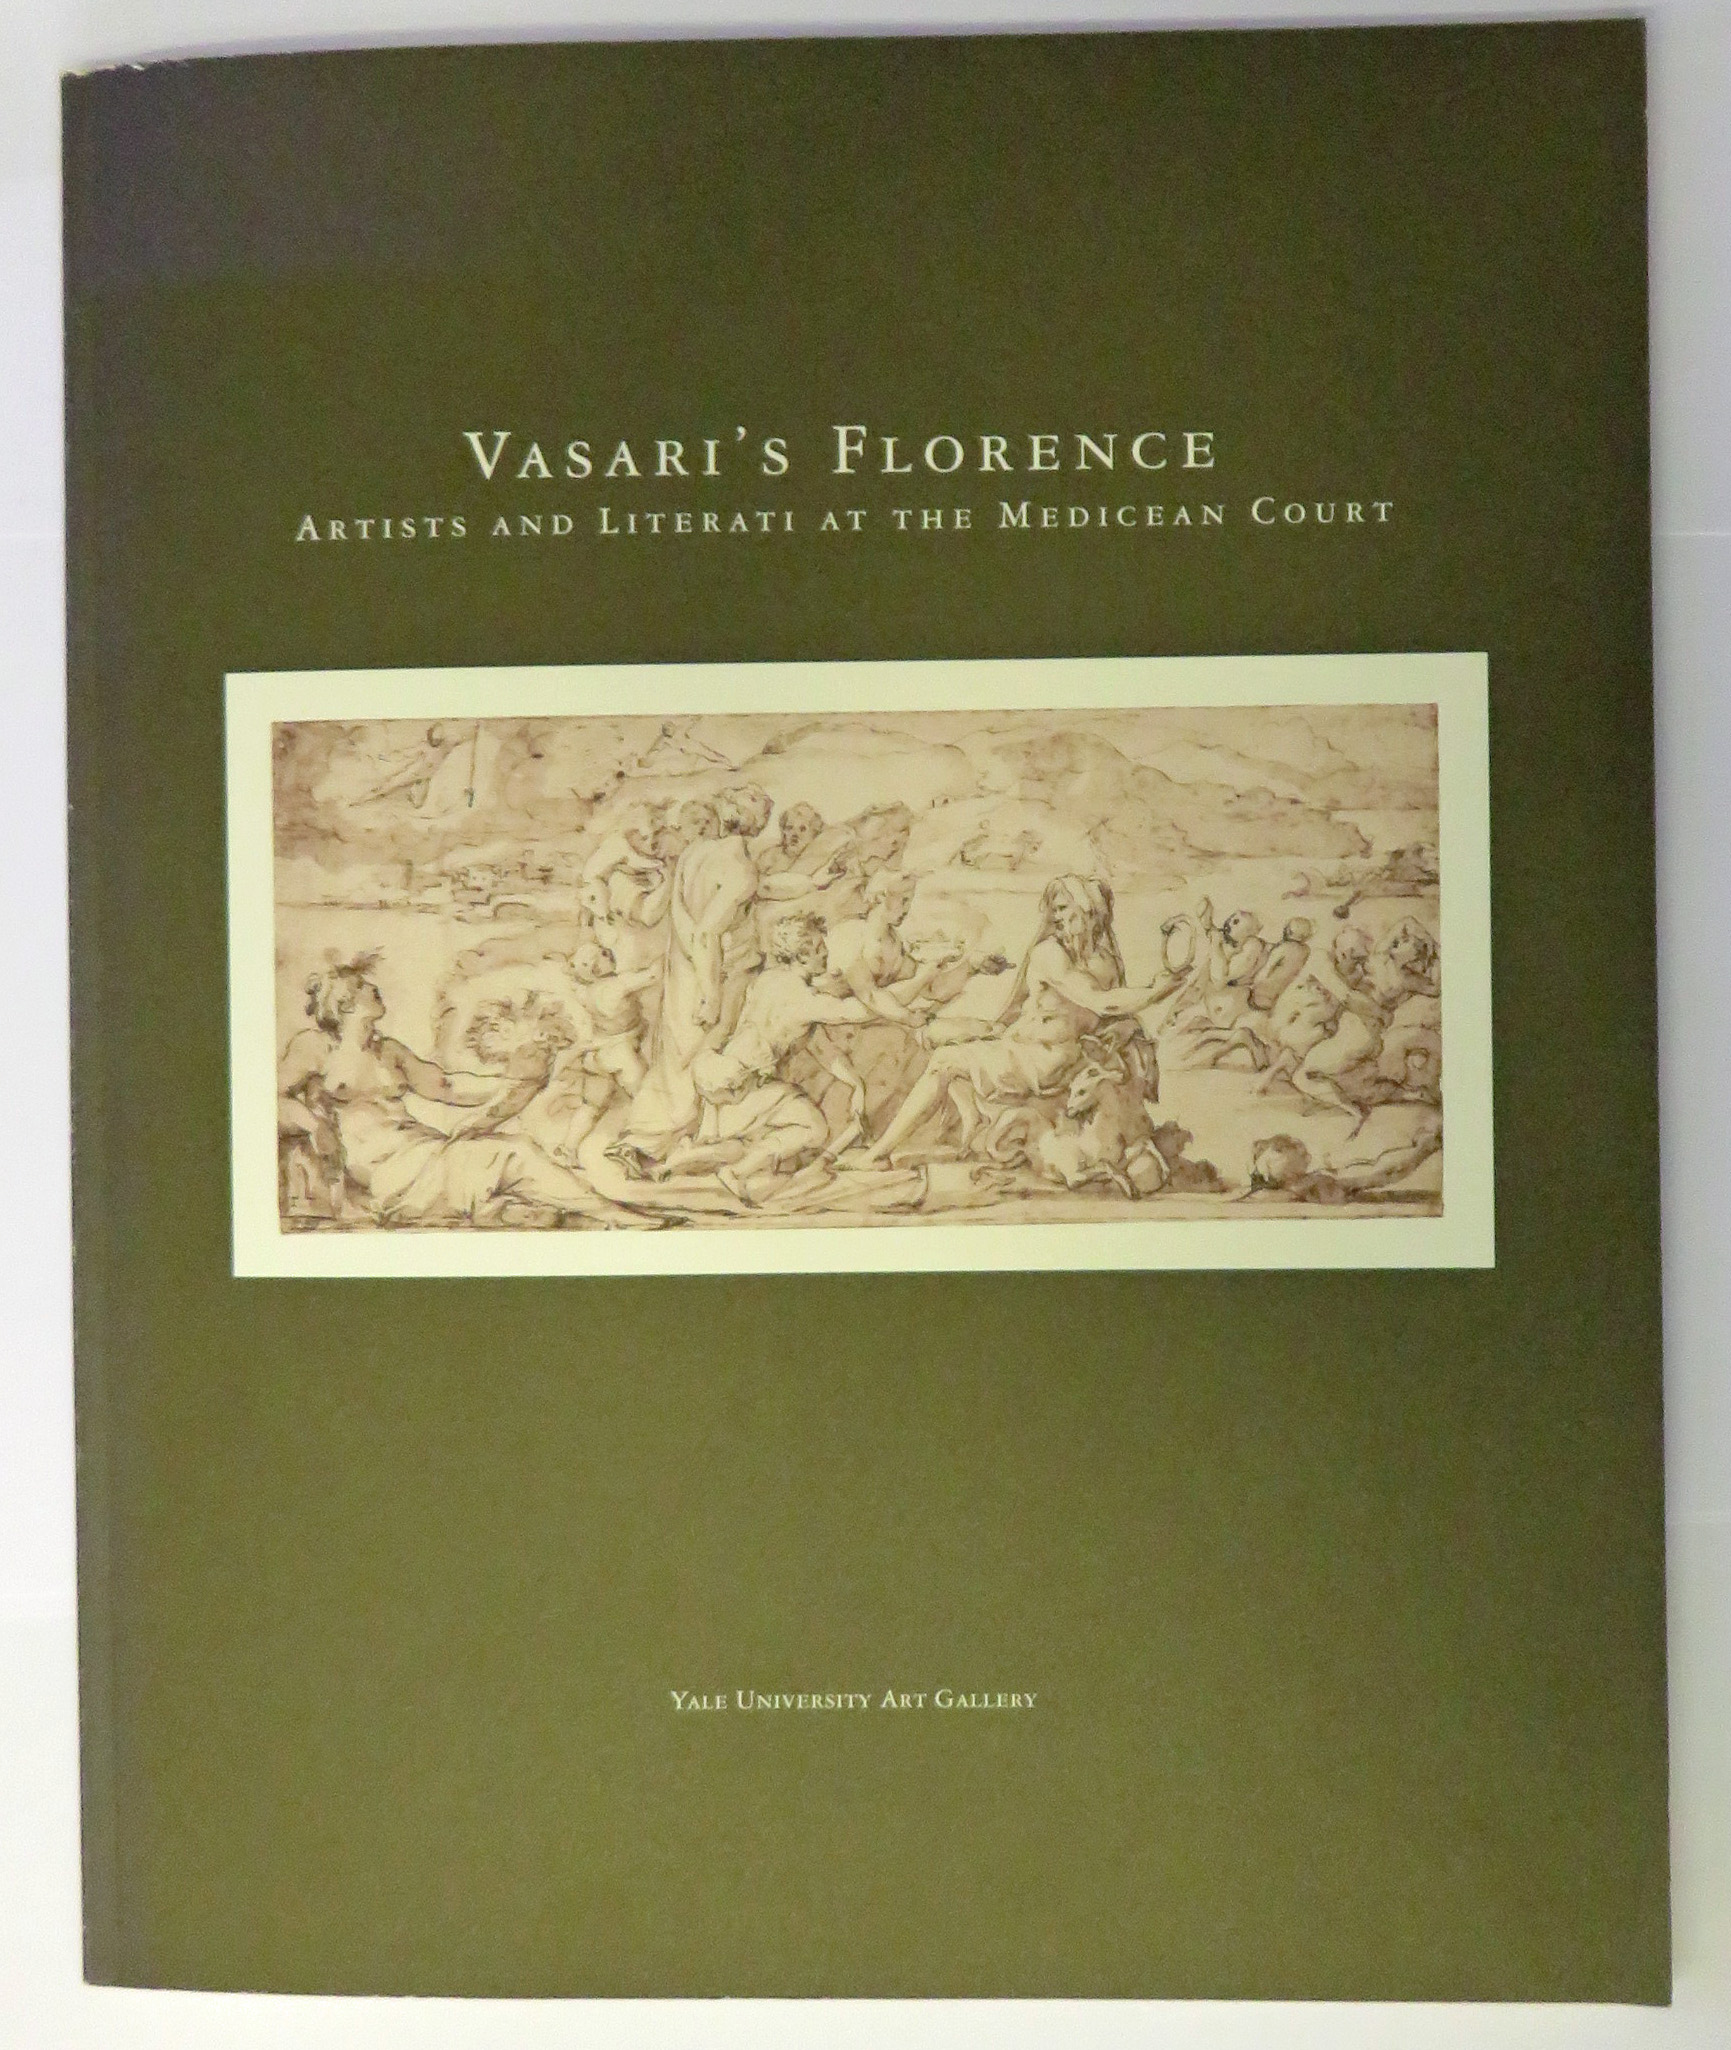 Vasari's Florence Artists and Literati at the Medicean Court